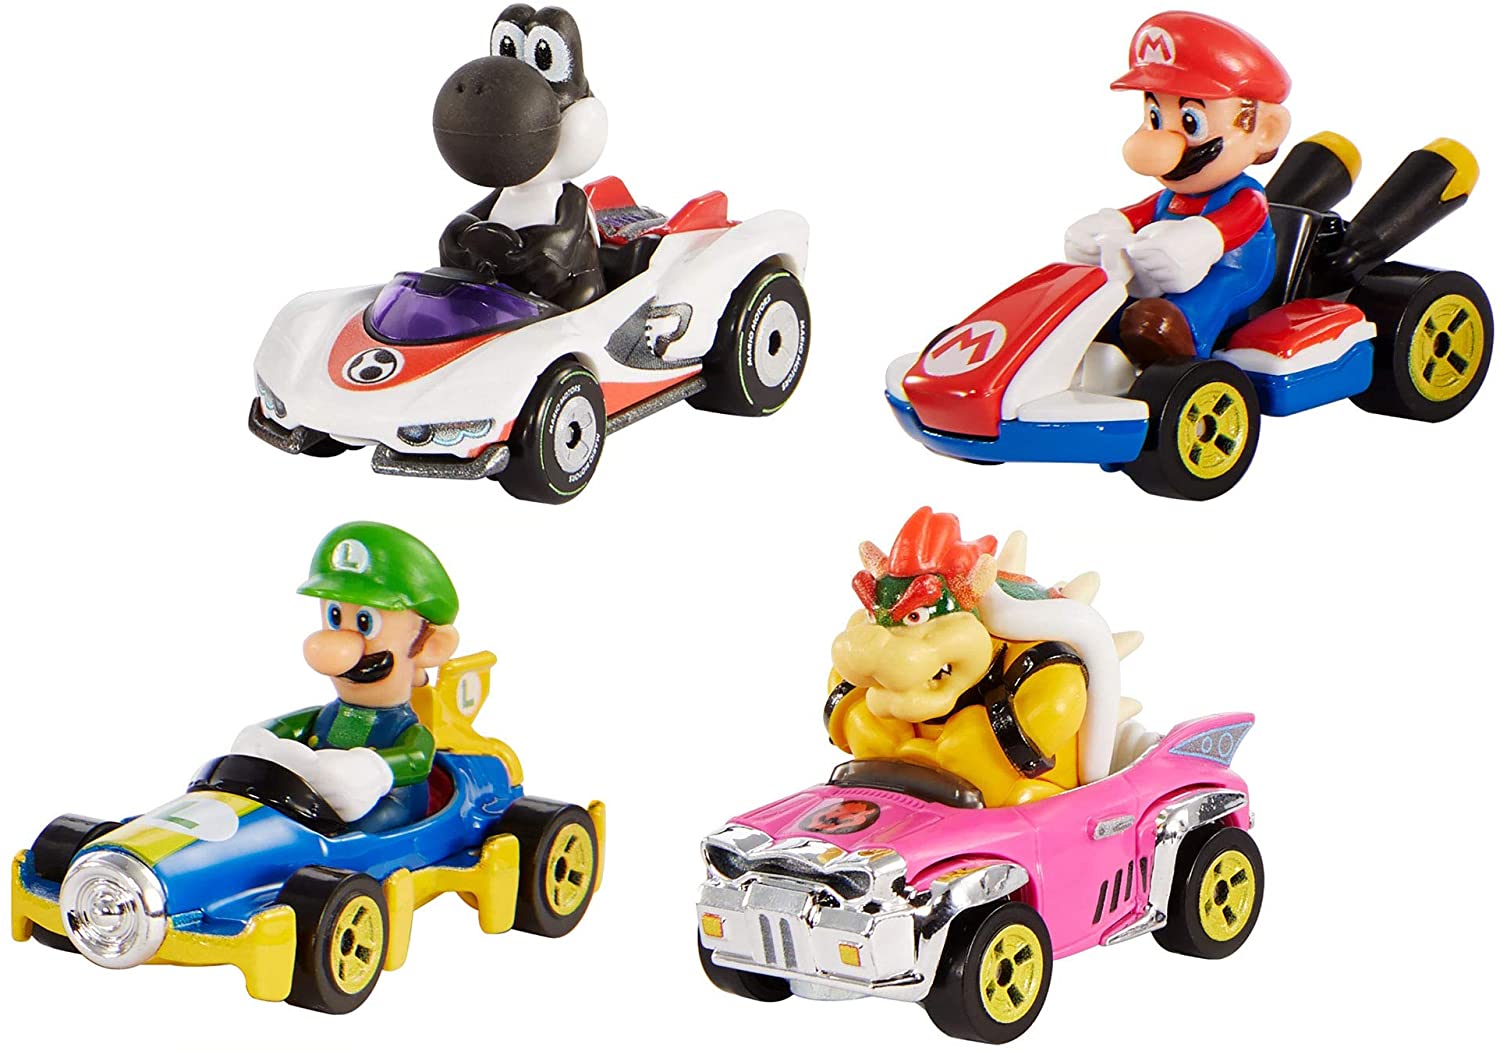 Hot Wheels Mario Kart Characters and Karts as Die-Cast Cars, Multicolor